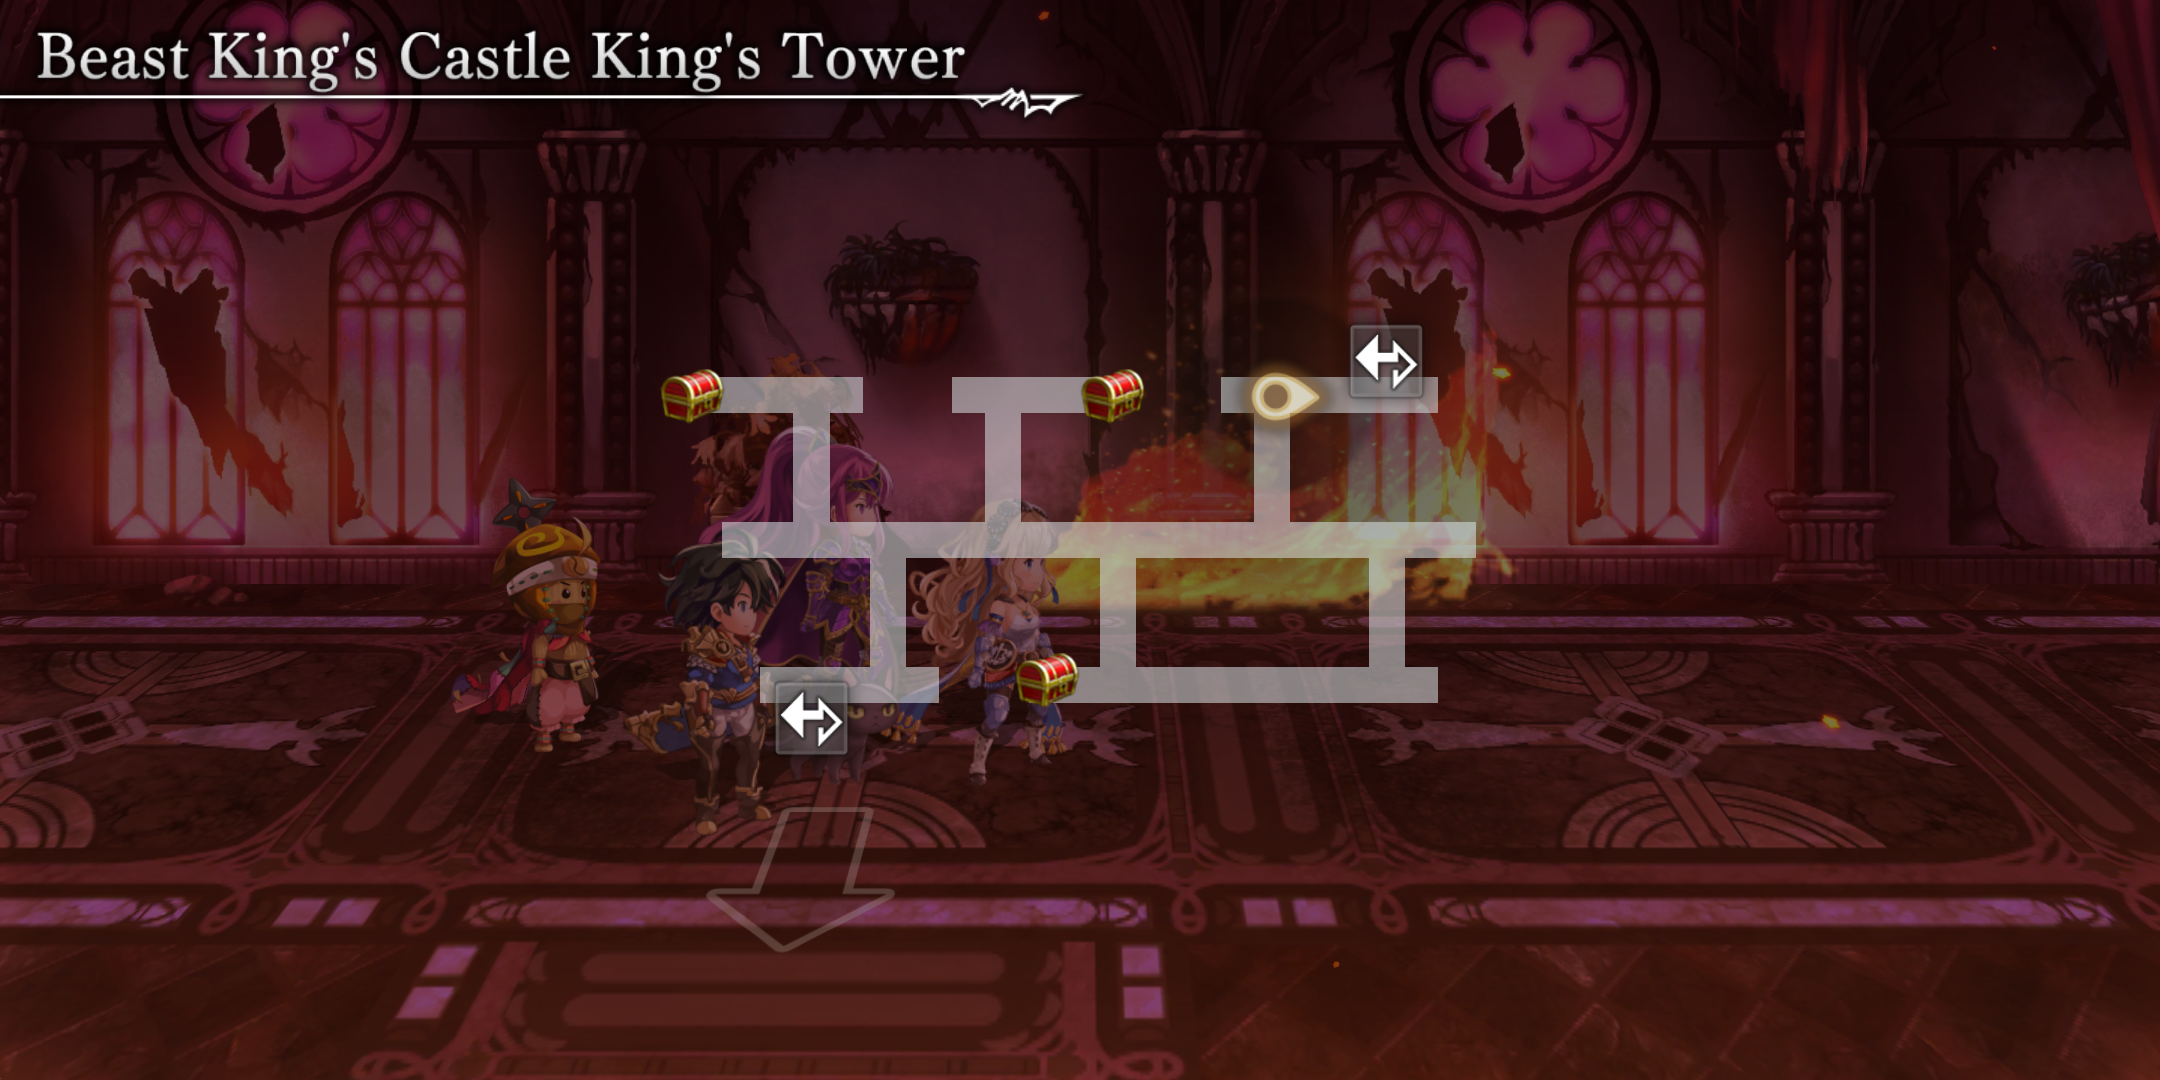 Burning Beast King's Castle (Another Dungeon) Minimap 3.png